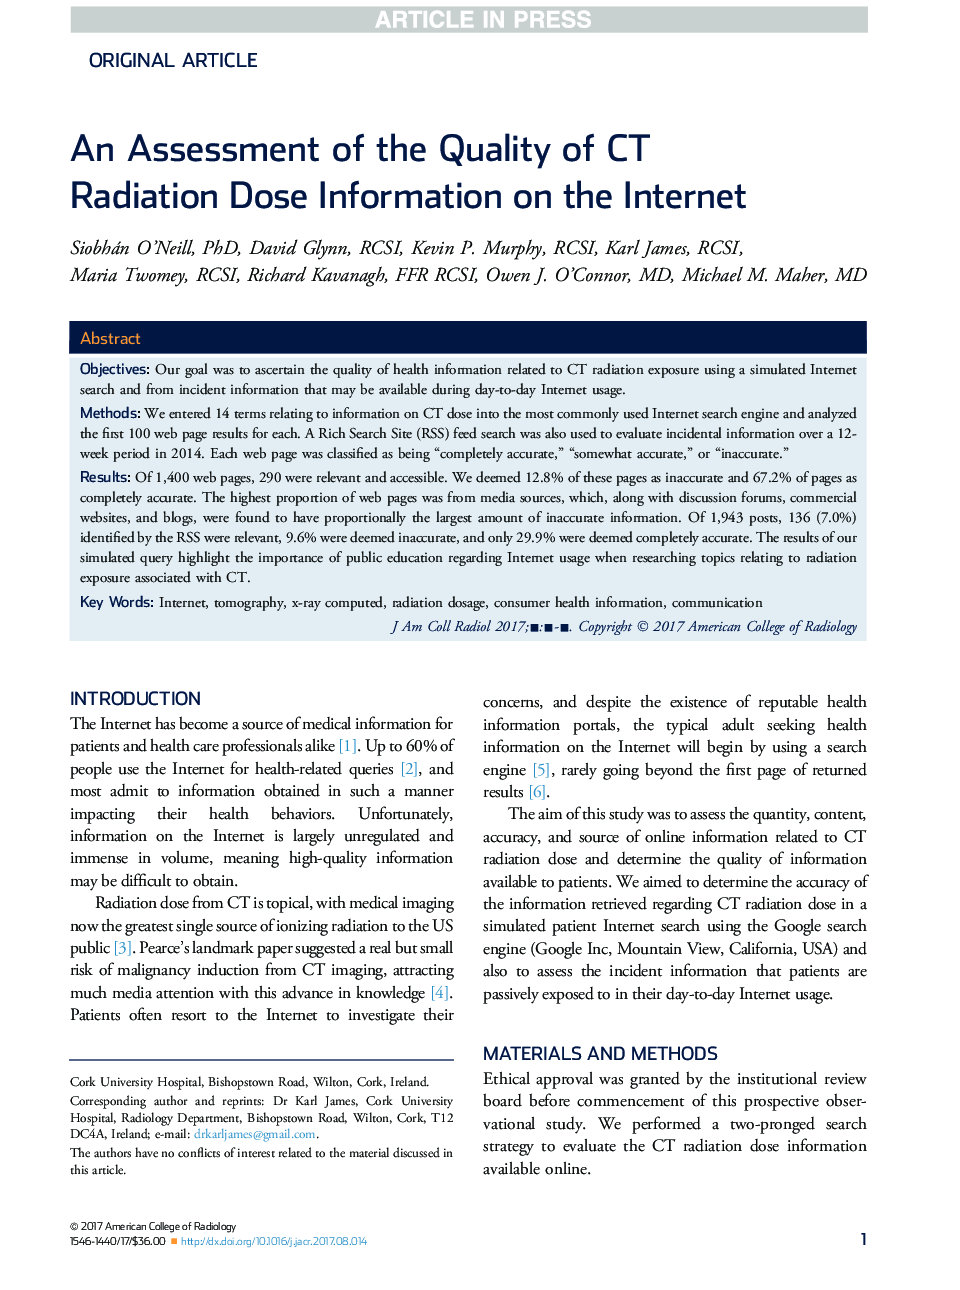 An Assessment of the Quality of CT Radiation Dose Information on the Internet